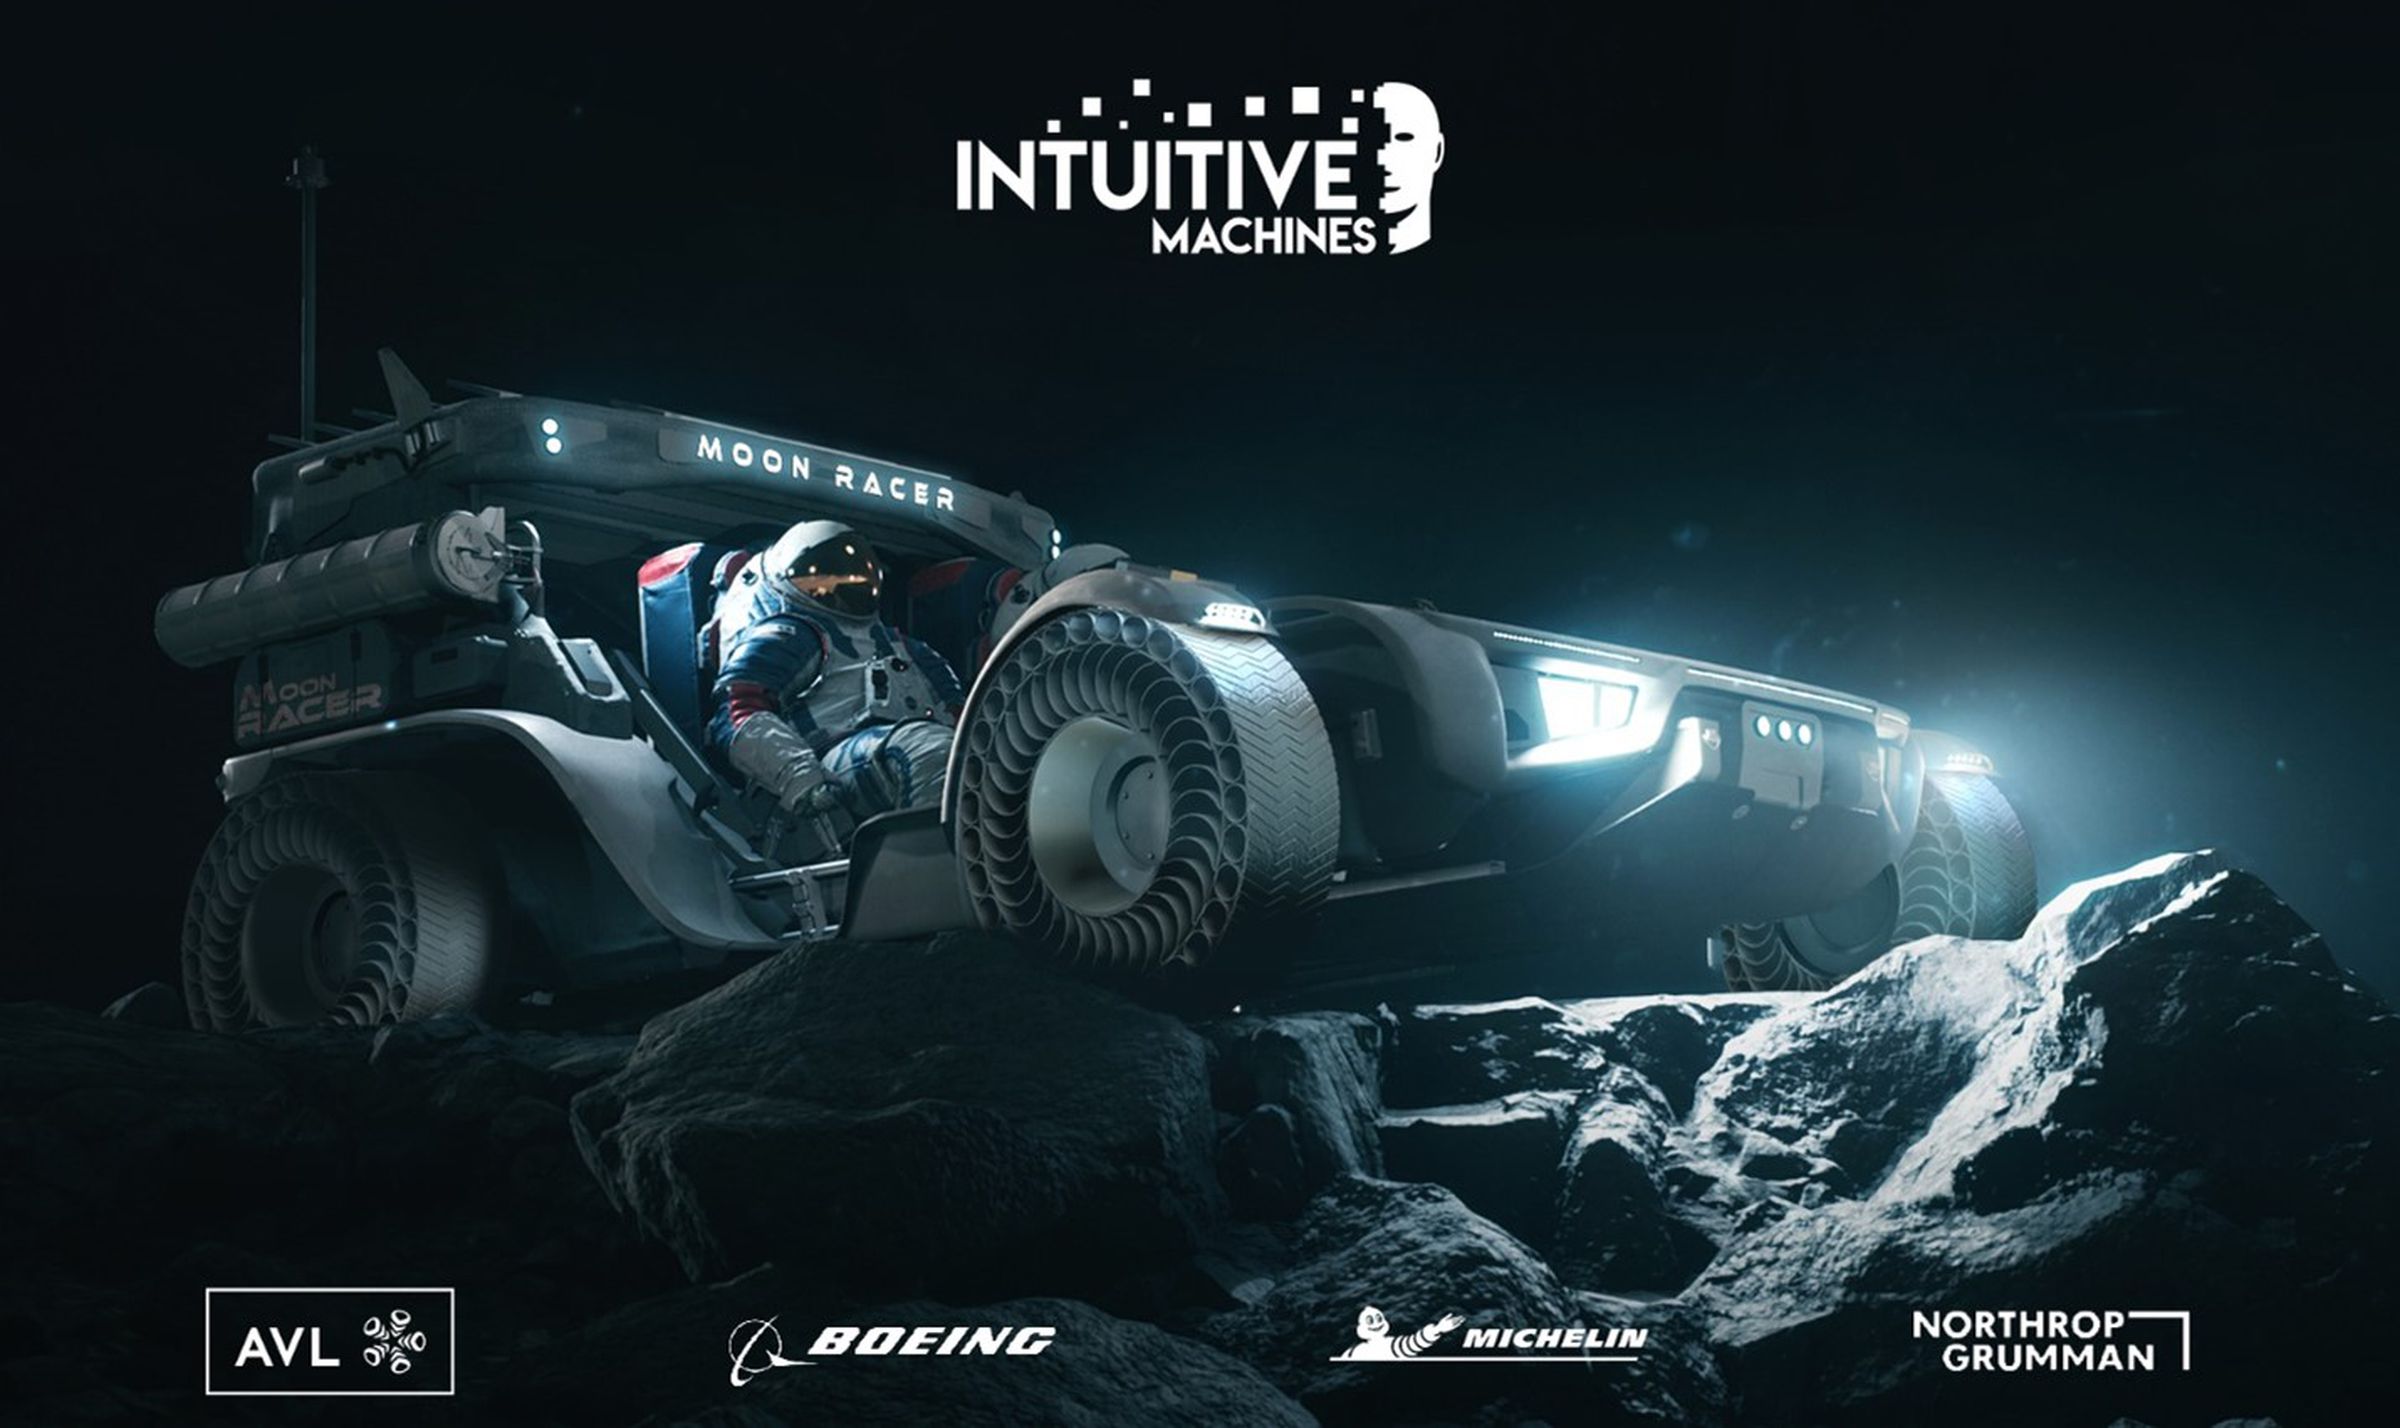 Concept photo from Intuitive Machines.